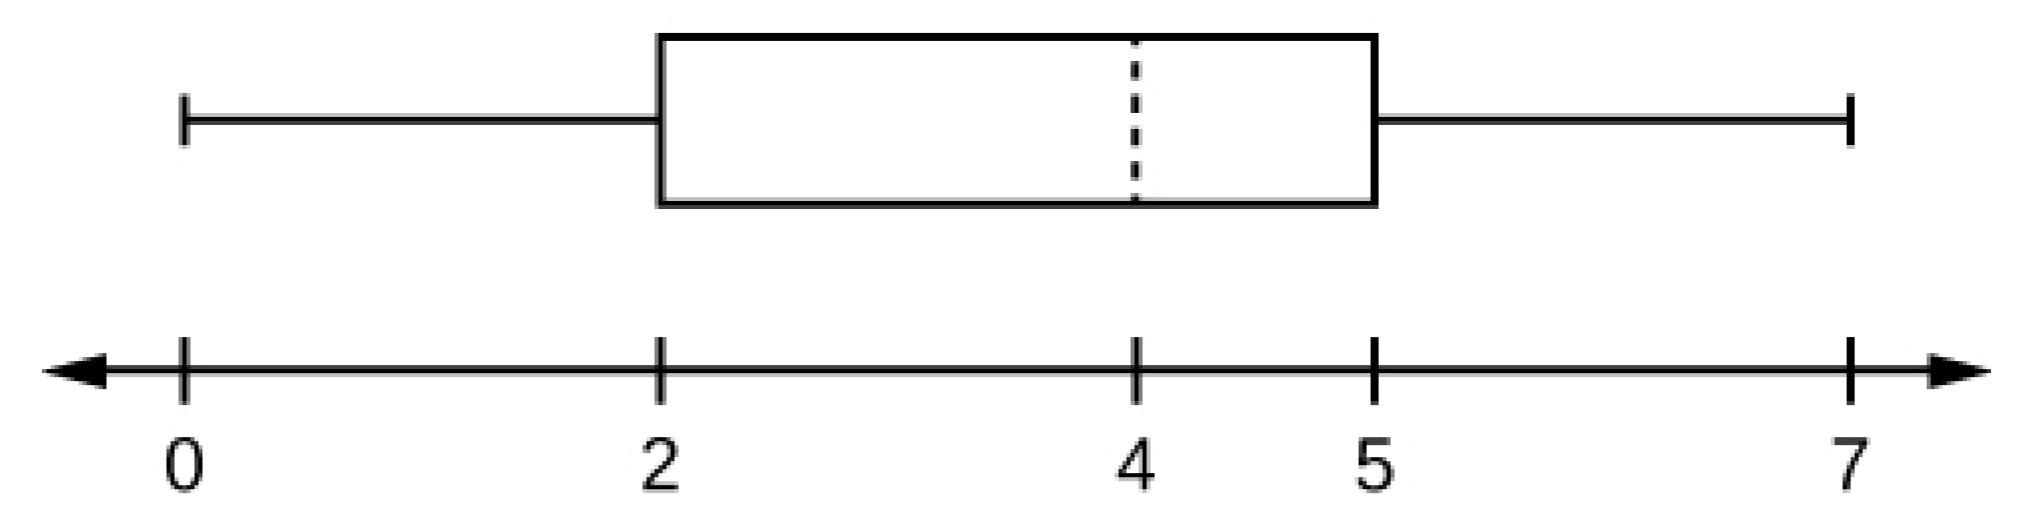 This is a boxplot over a number line from 0 to 7. The left whisker ranges from minimum, 0, to lower quartile, 2. The box runs from lower quartile, 2, to upper quartile, 5. A dashed line marks the median at 4. The right whisker runs from 5 to maximum value 7.